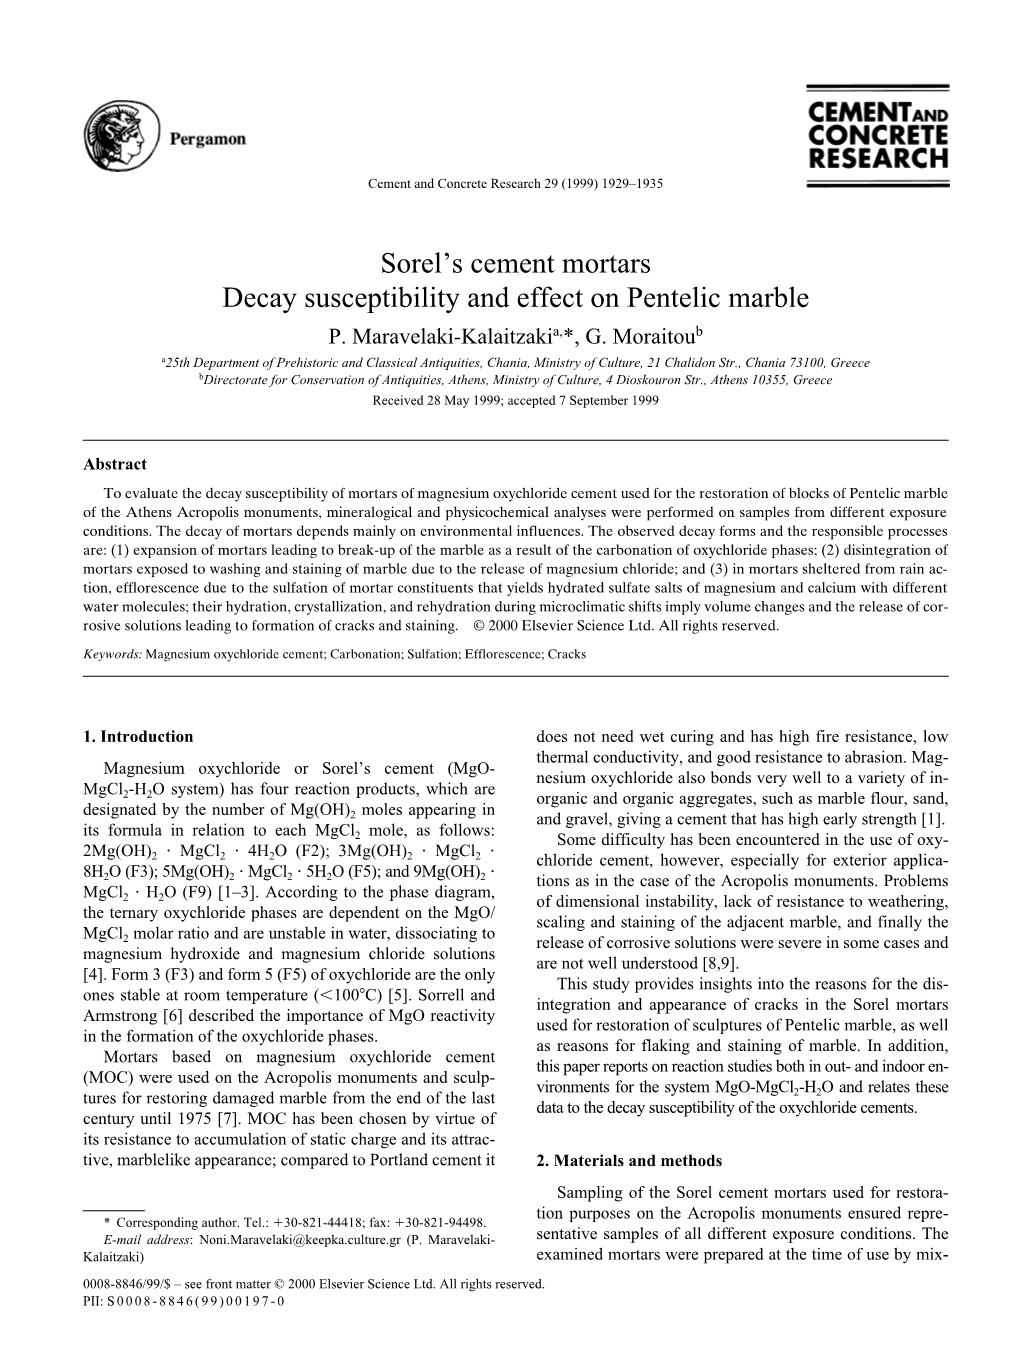 Sorel's Cement Mortars Decay Susceptibility and Effect on Pentelic